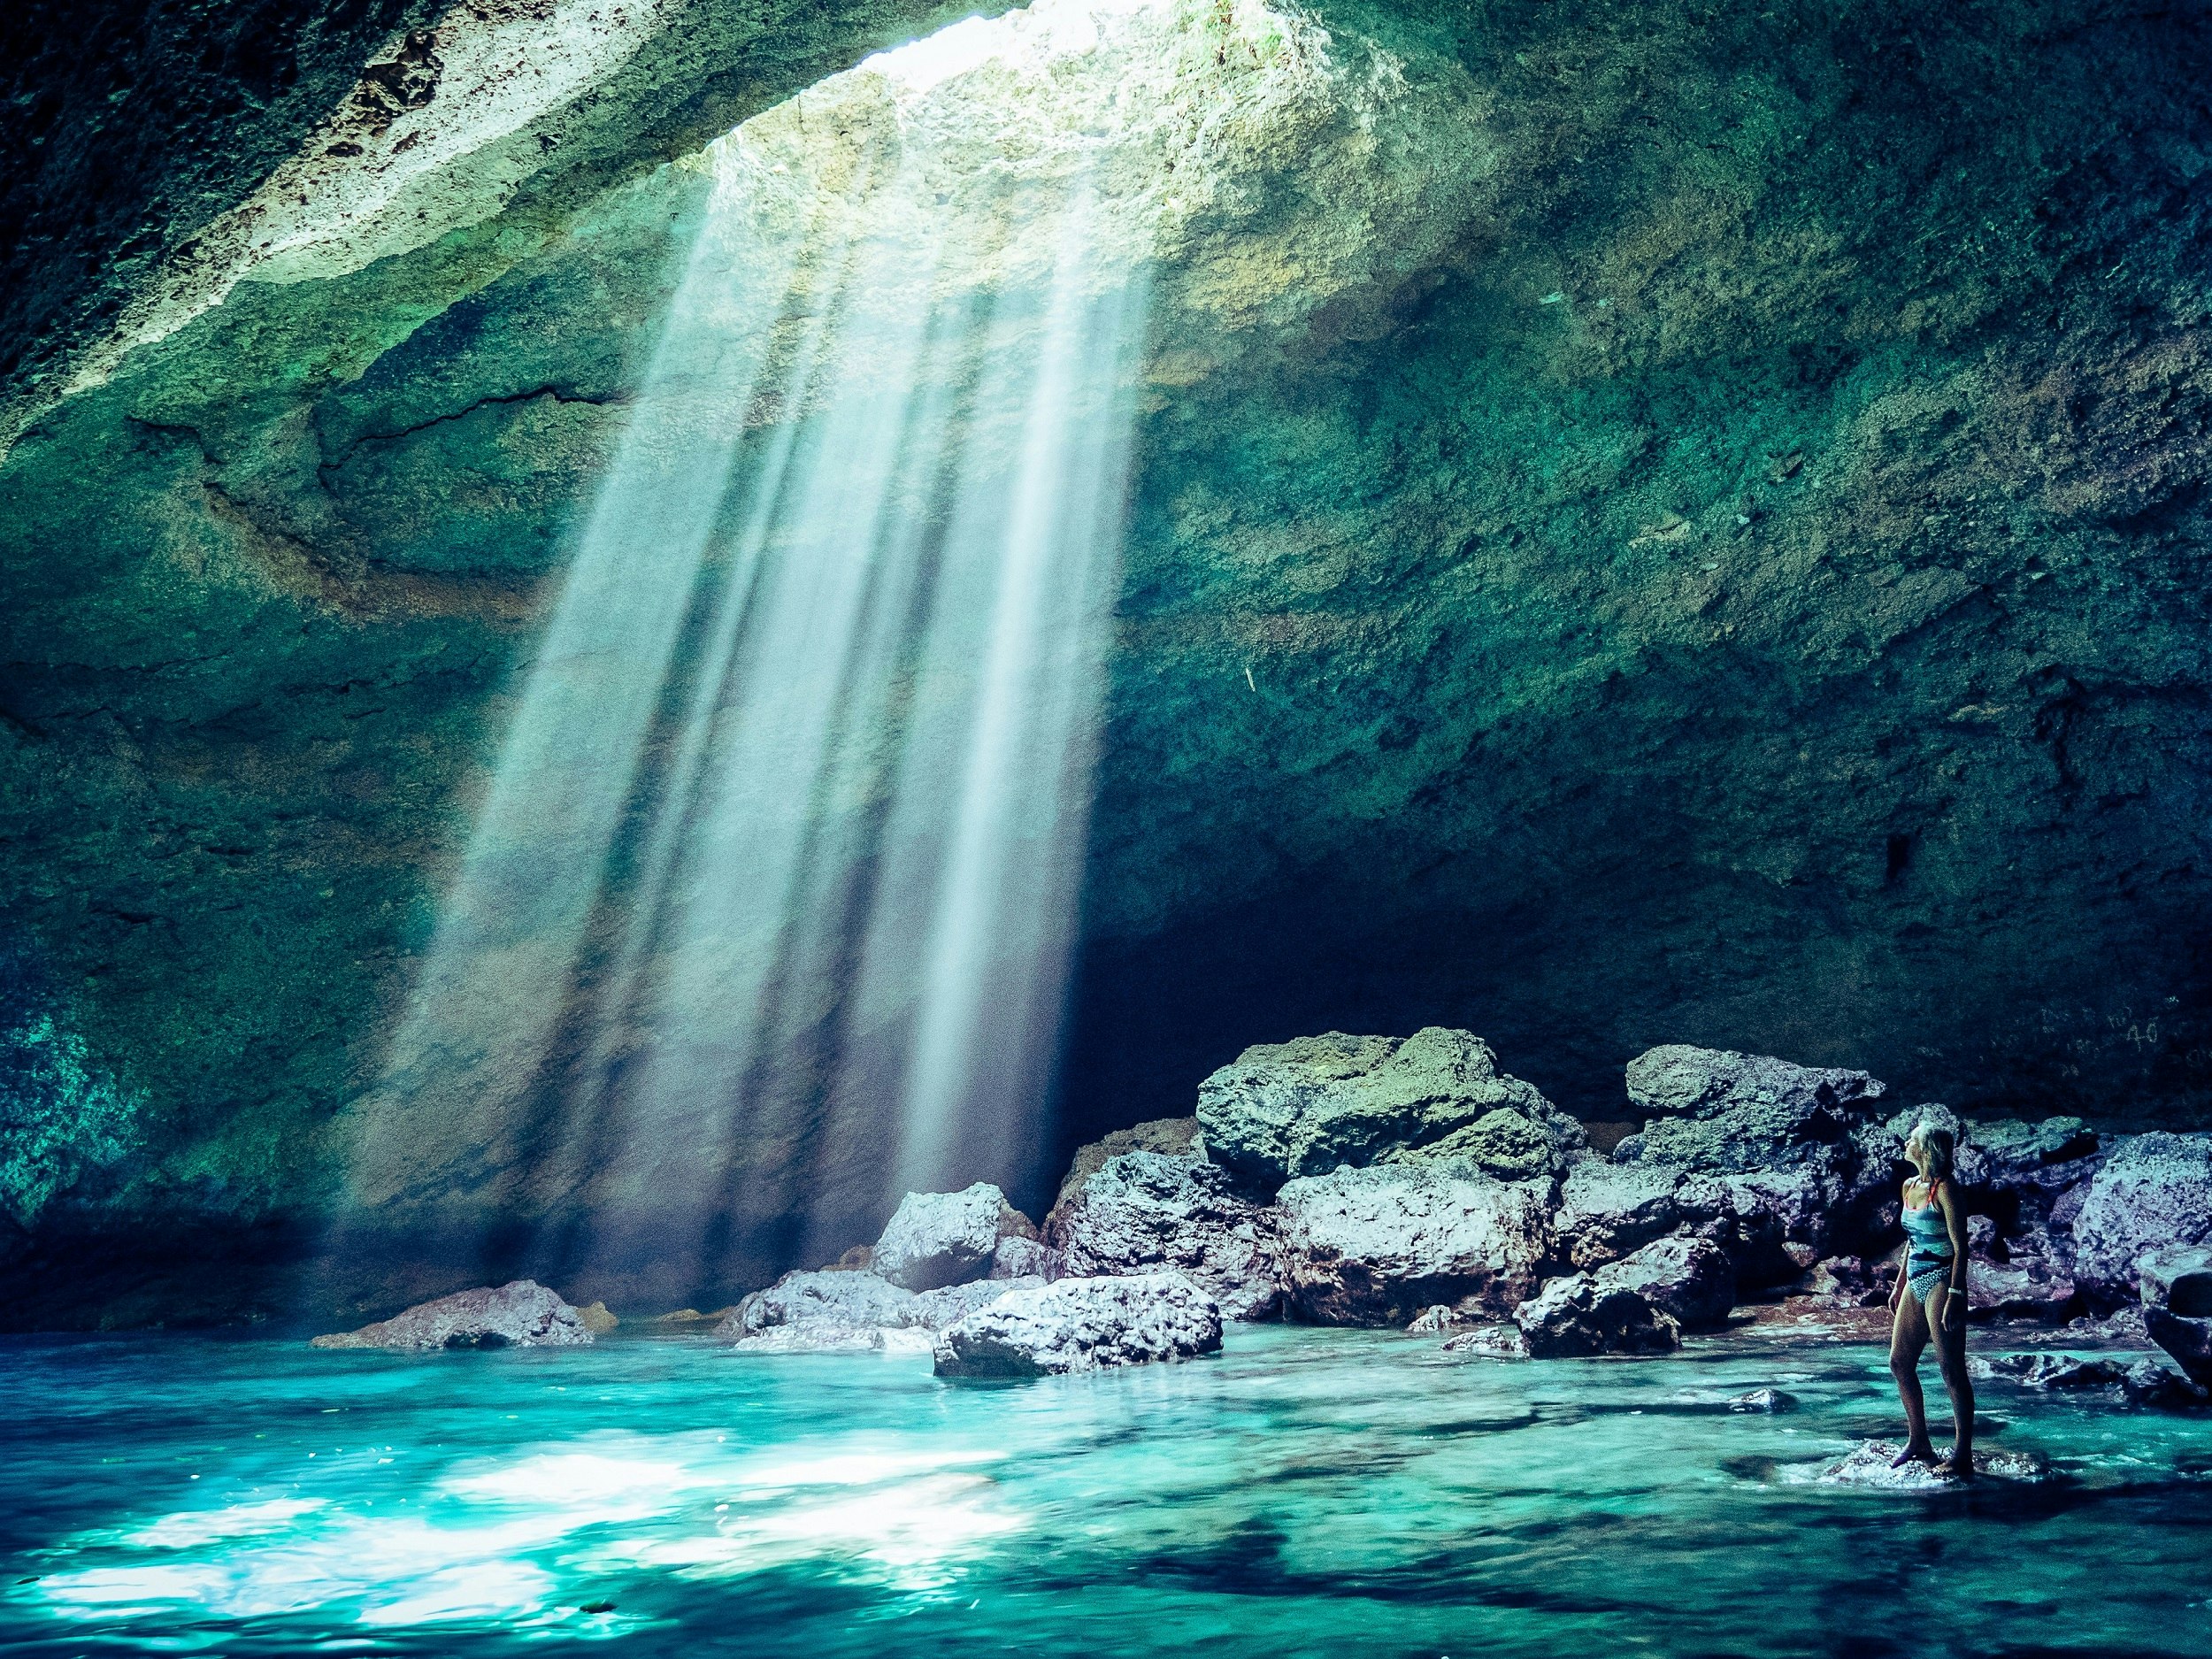 The author stands in a huge cave on a rock that is at the water's surface and looks up to brilliant shafts of light raining down from a hole in the top of the cave; the light that is hitting the water is causing it to glow a turquoise colour. The whole scene is bathed in a green hue.